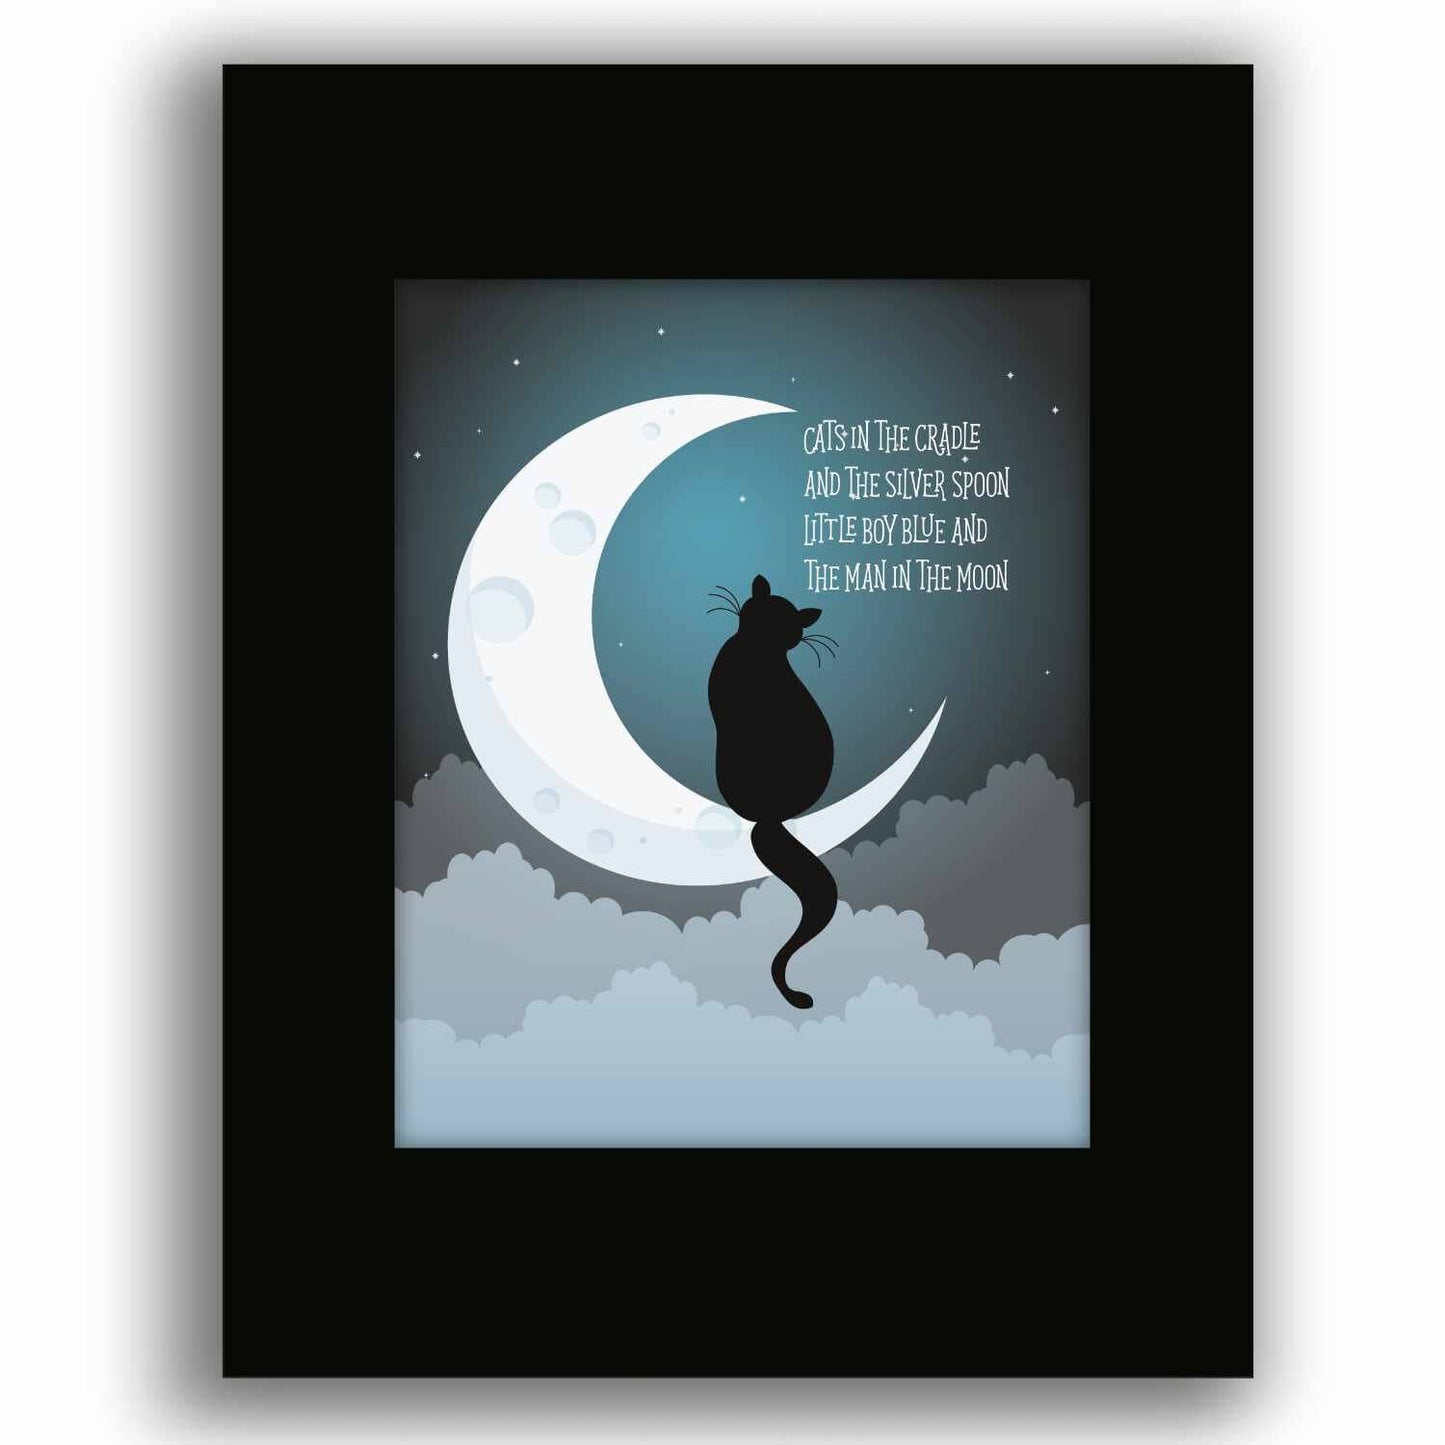 Cats in the Cradle by Harry Chapin - Children's 70s Lyric Art Song Lyrics Art Song Lyrics Art 8x10 Black Matted Unframed Print 